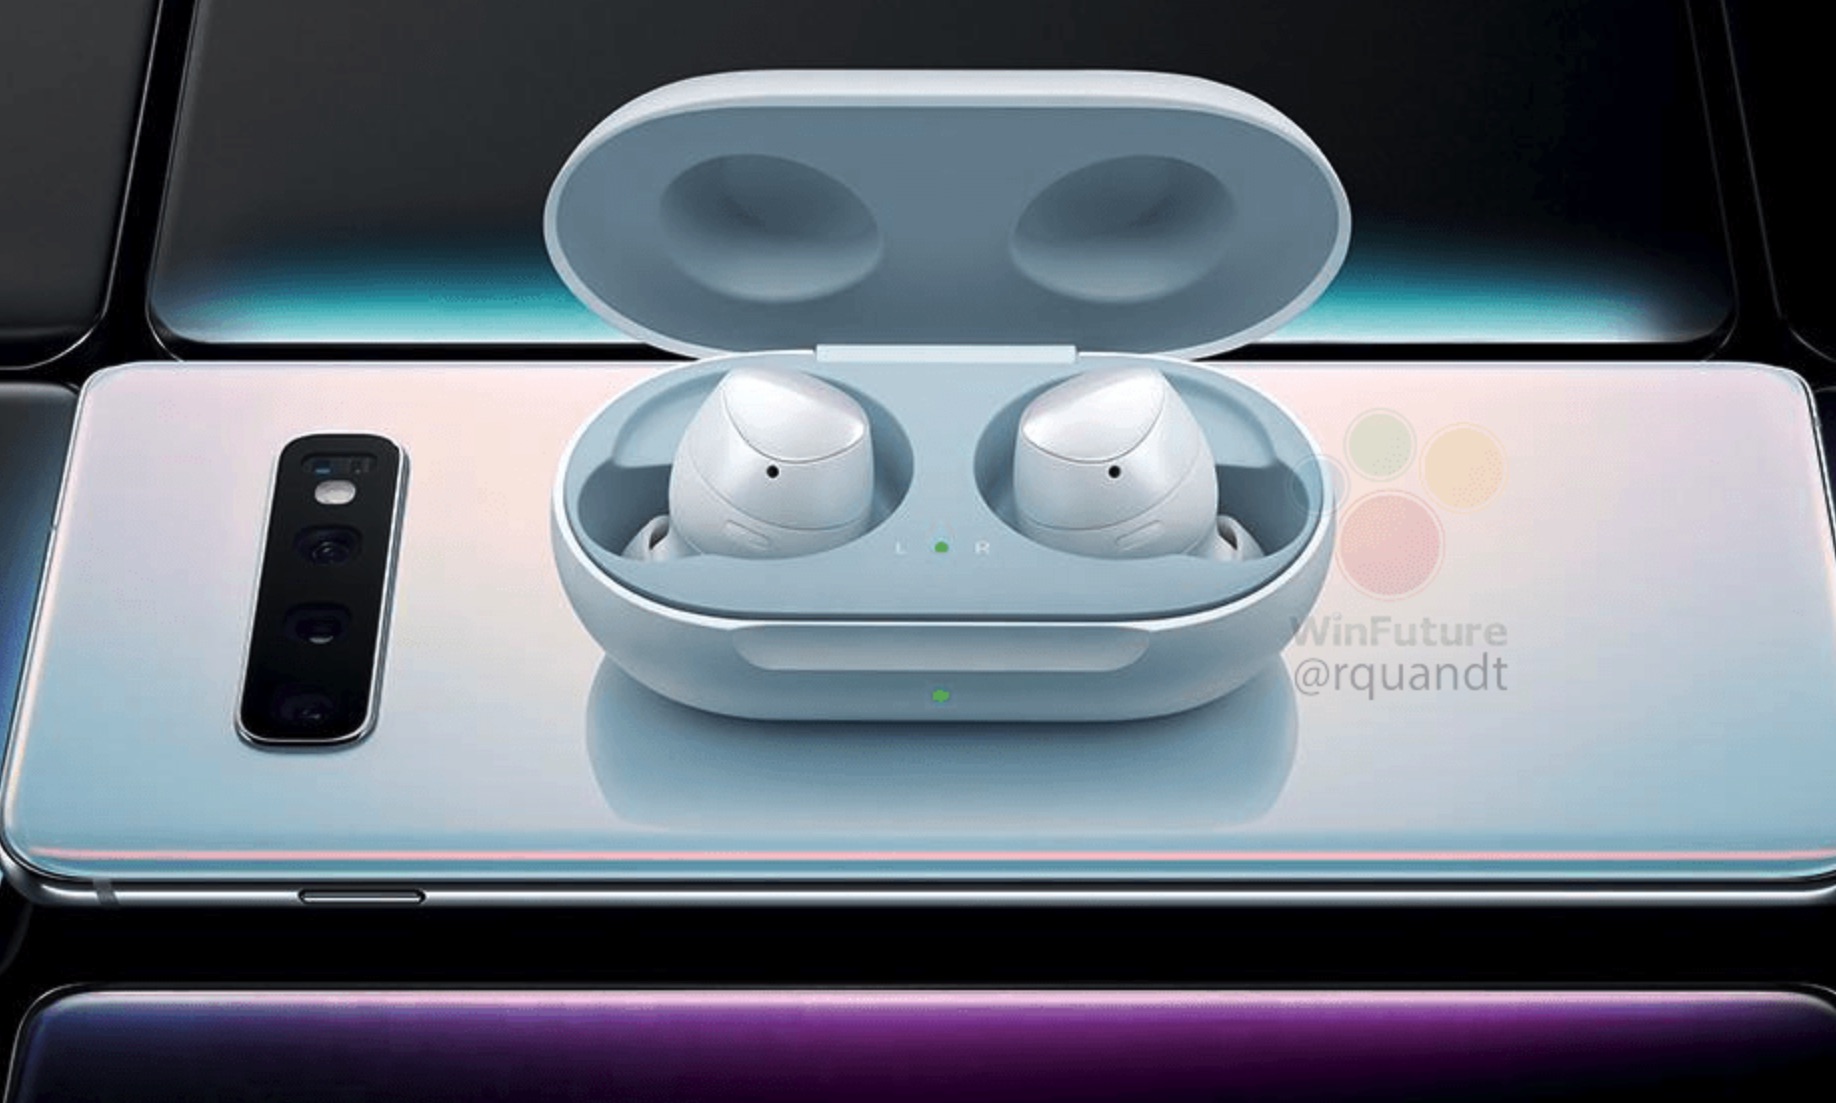 Afgekeurd gisteren overschrijving Take a peek at Samsung's AirPods rival 'Galaxy Buds' | Cult of Mac